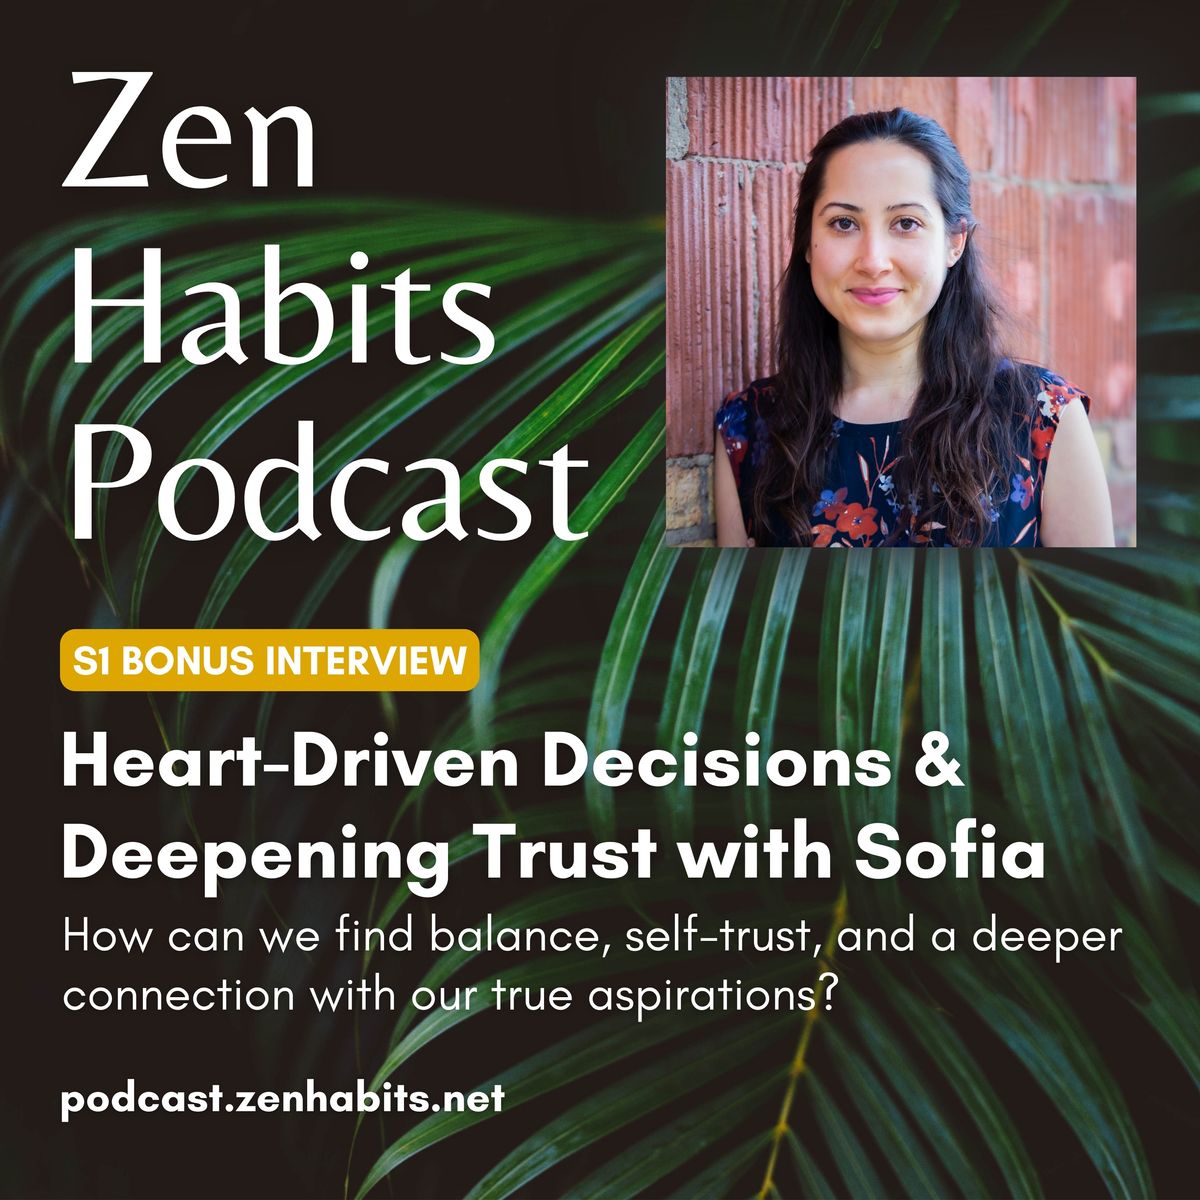 S1 Bonus - Heart-Driven Decisions & Deepening Trust with Sofia